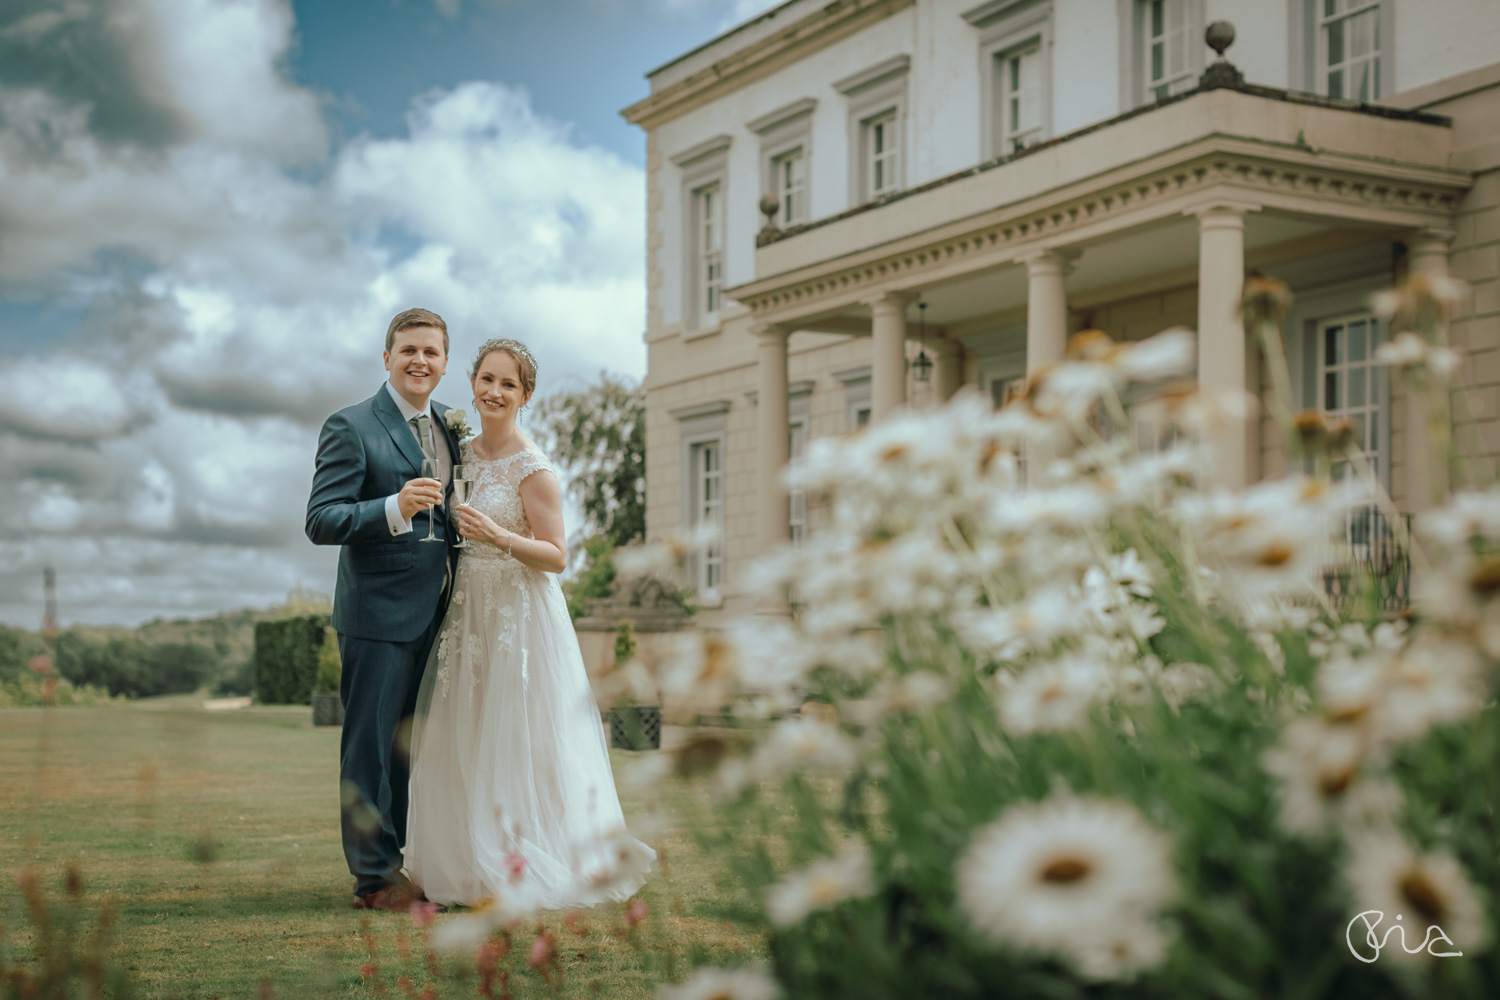 Summer wedding at Buxted Park Hotel